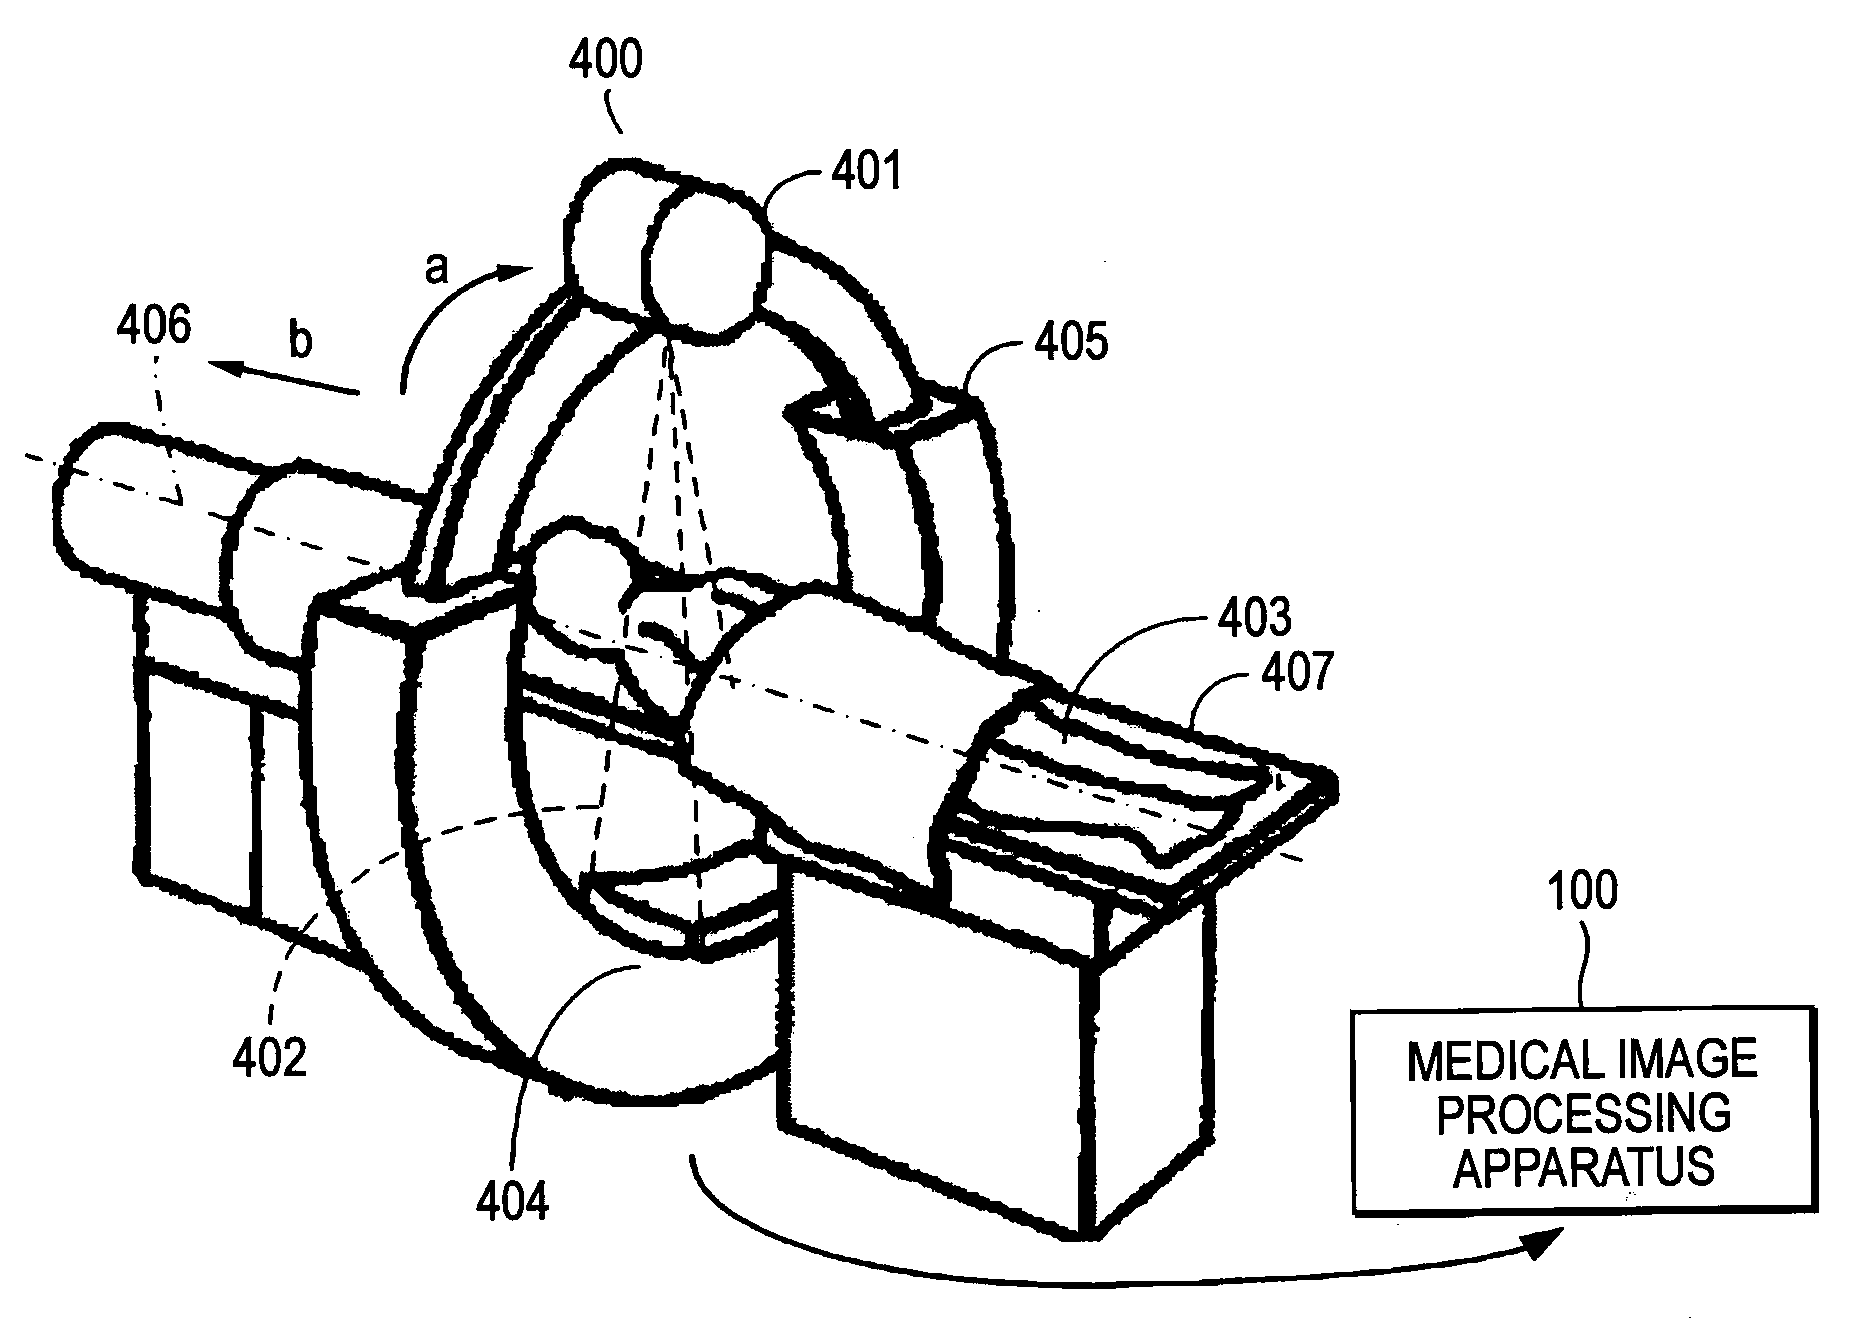 Medical image processing apparatus and method